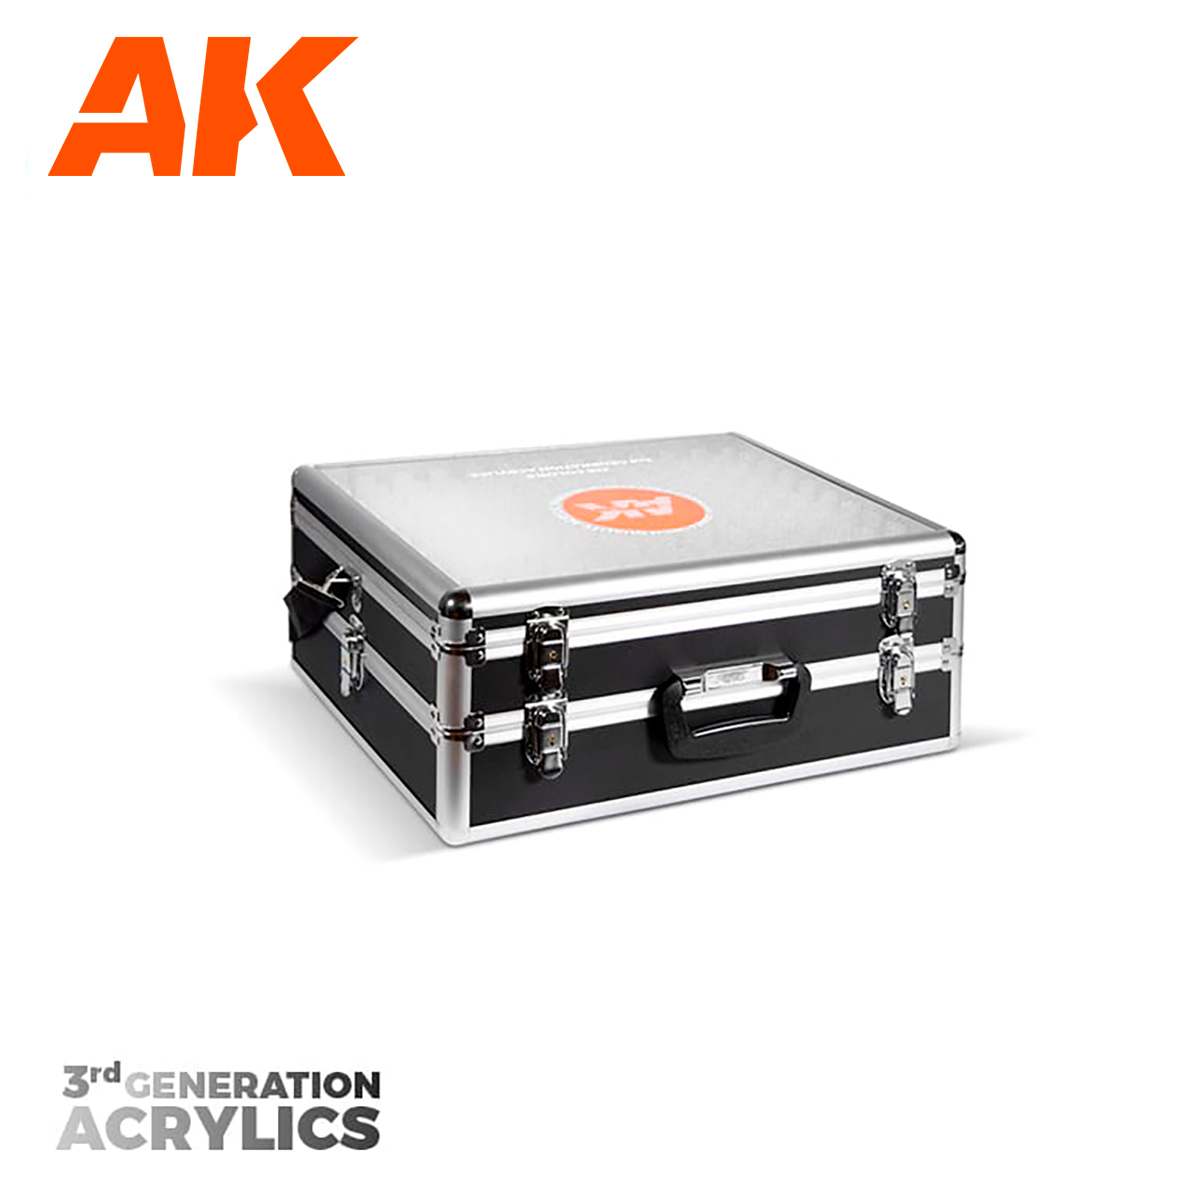 Buy AK BRIEFCASE WITH 235 3GEN-COLORS online for666,25€